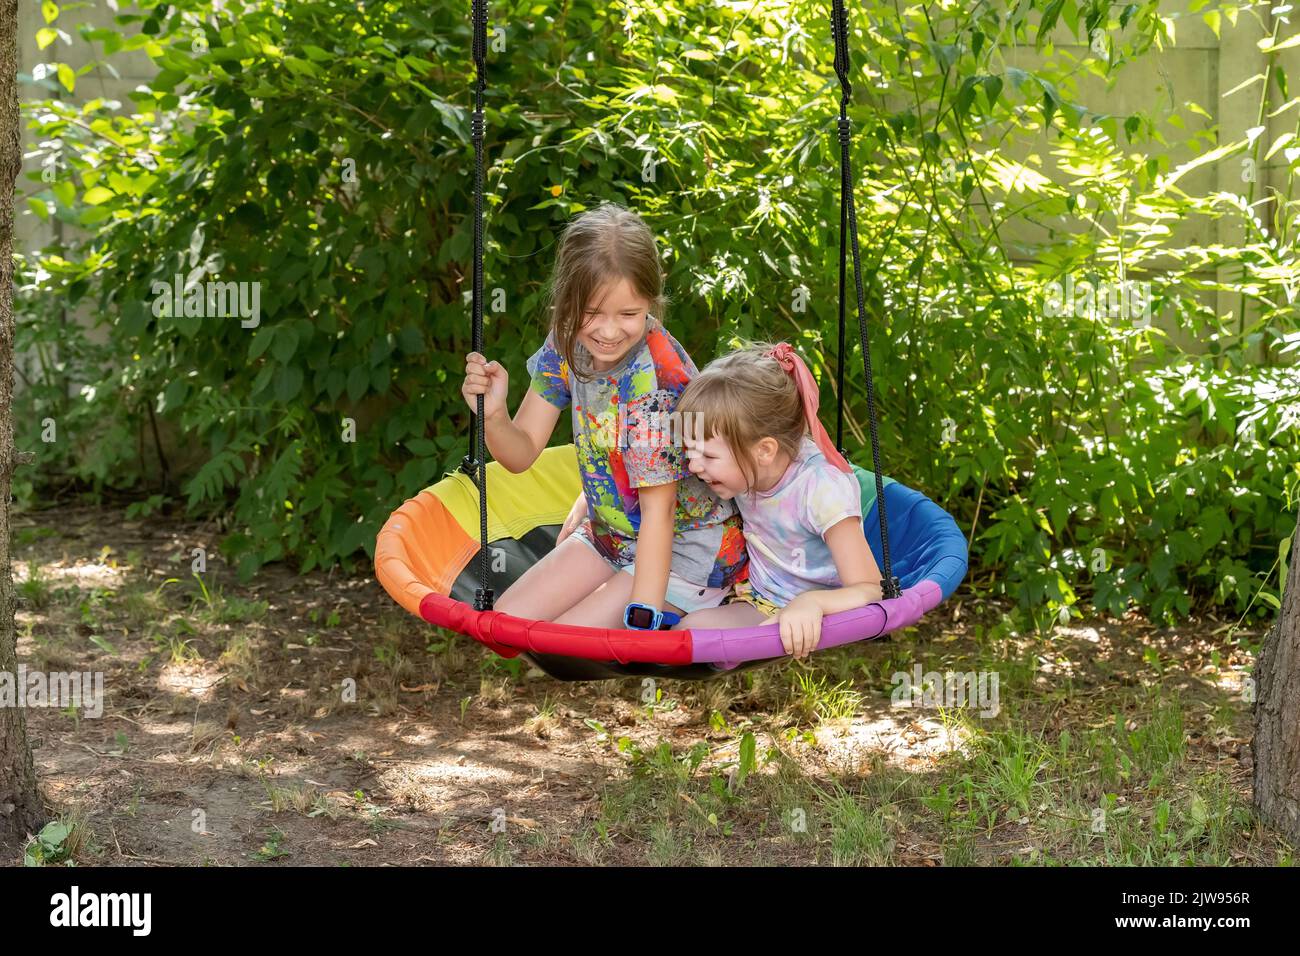 Two children, girls, kids sitting on an outdoor swing in the garden laughing together, having fun outdoors. Outside activities, laughter, real people Stock Photo